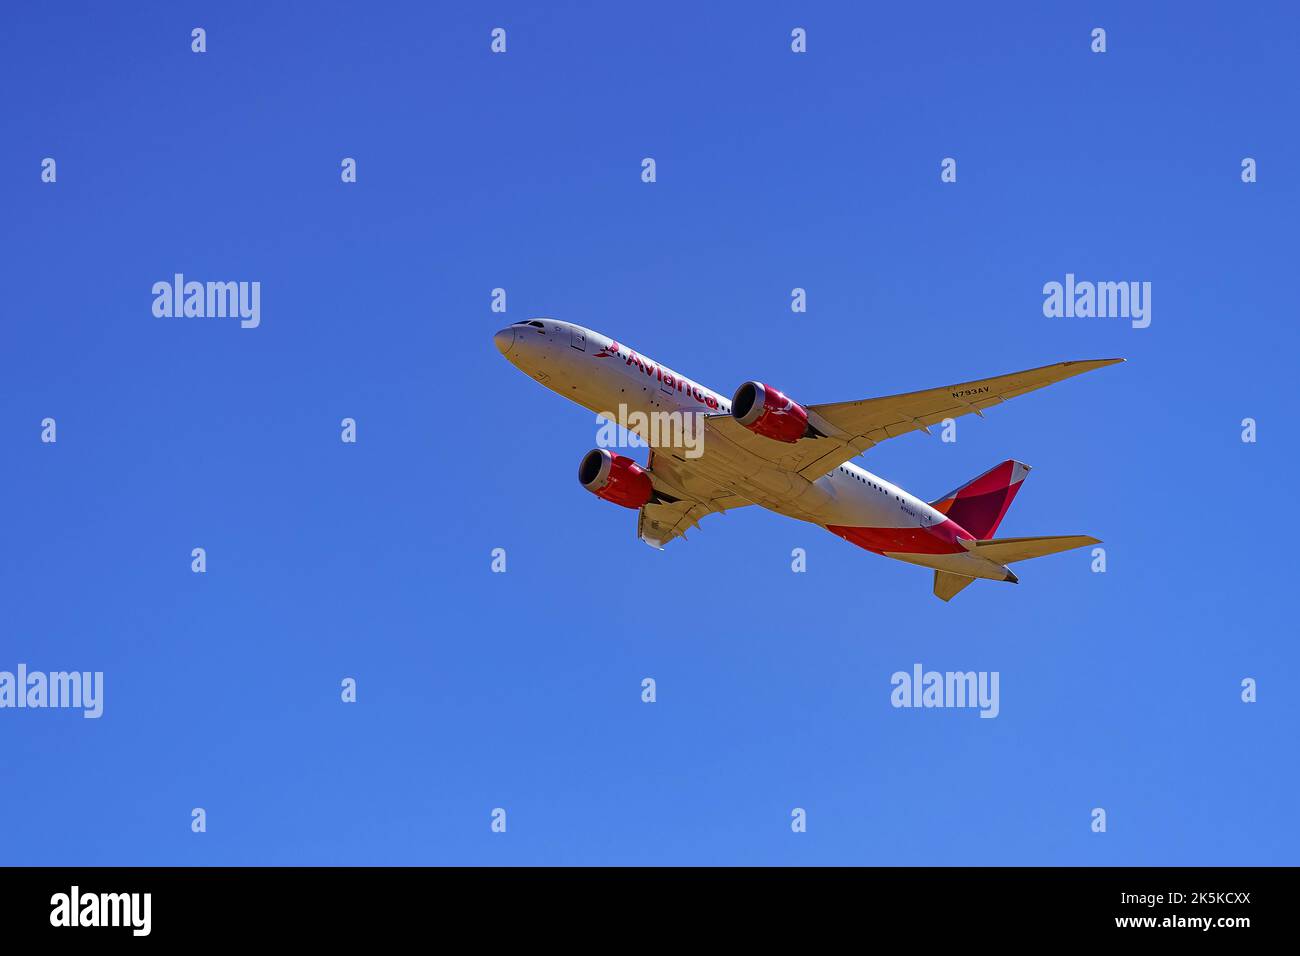 Madrid, Spain, October 30, 2022: Large plane of the Avianca airline seen from below and flying over the city. Stock Photo